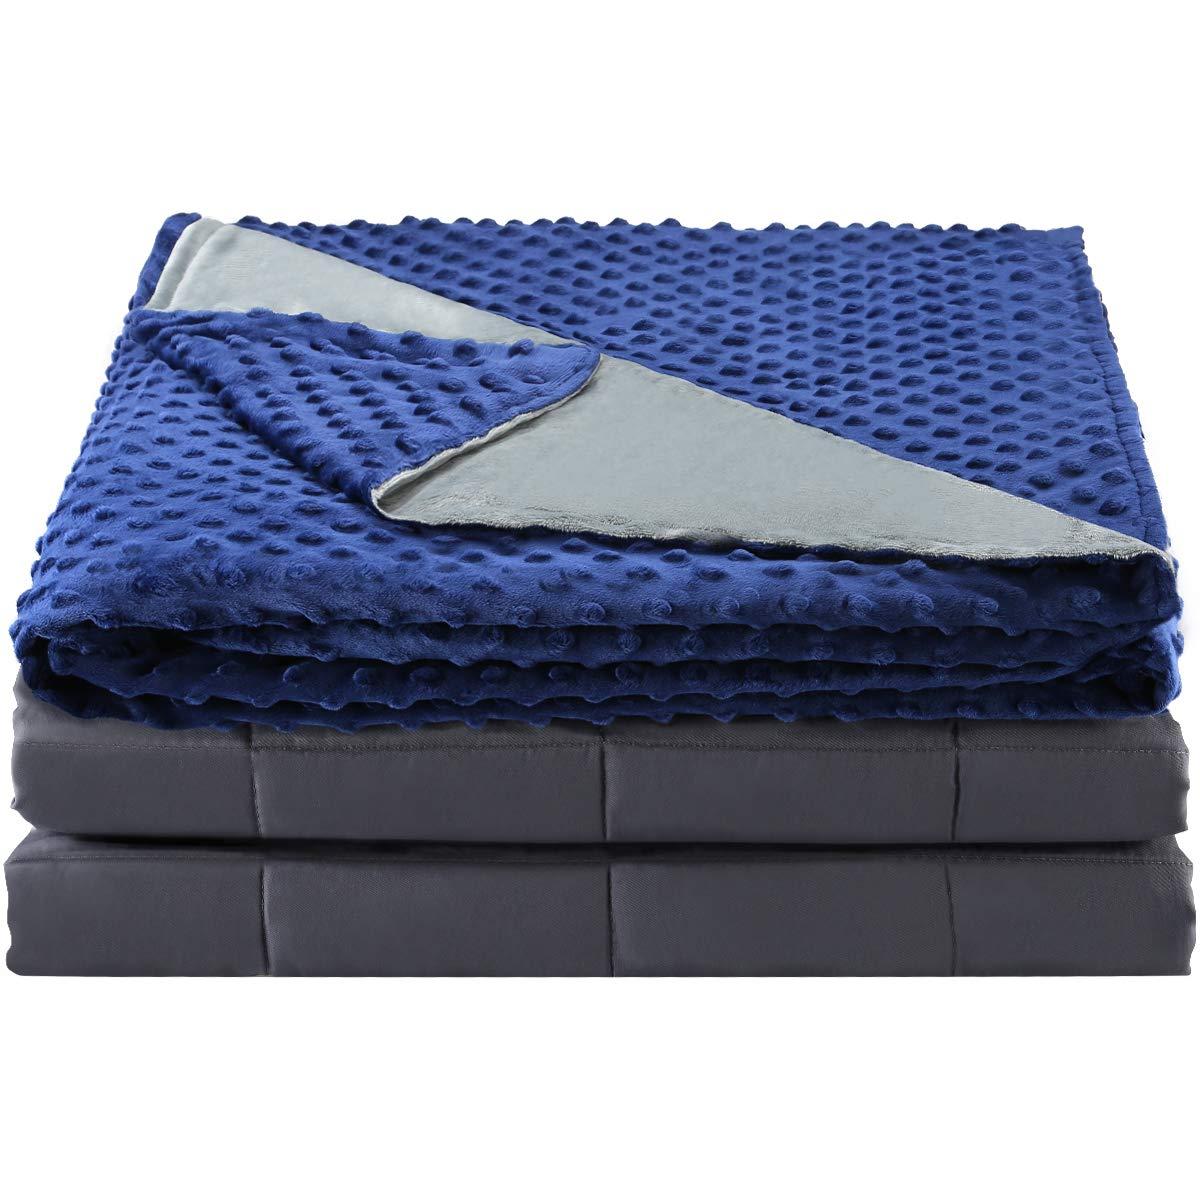 TomCare Weighted Blanket & Removable Duvet Cover (48â€�x72â€�, 15lbs for 120-180lbs)